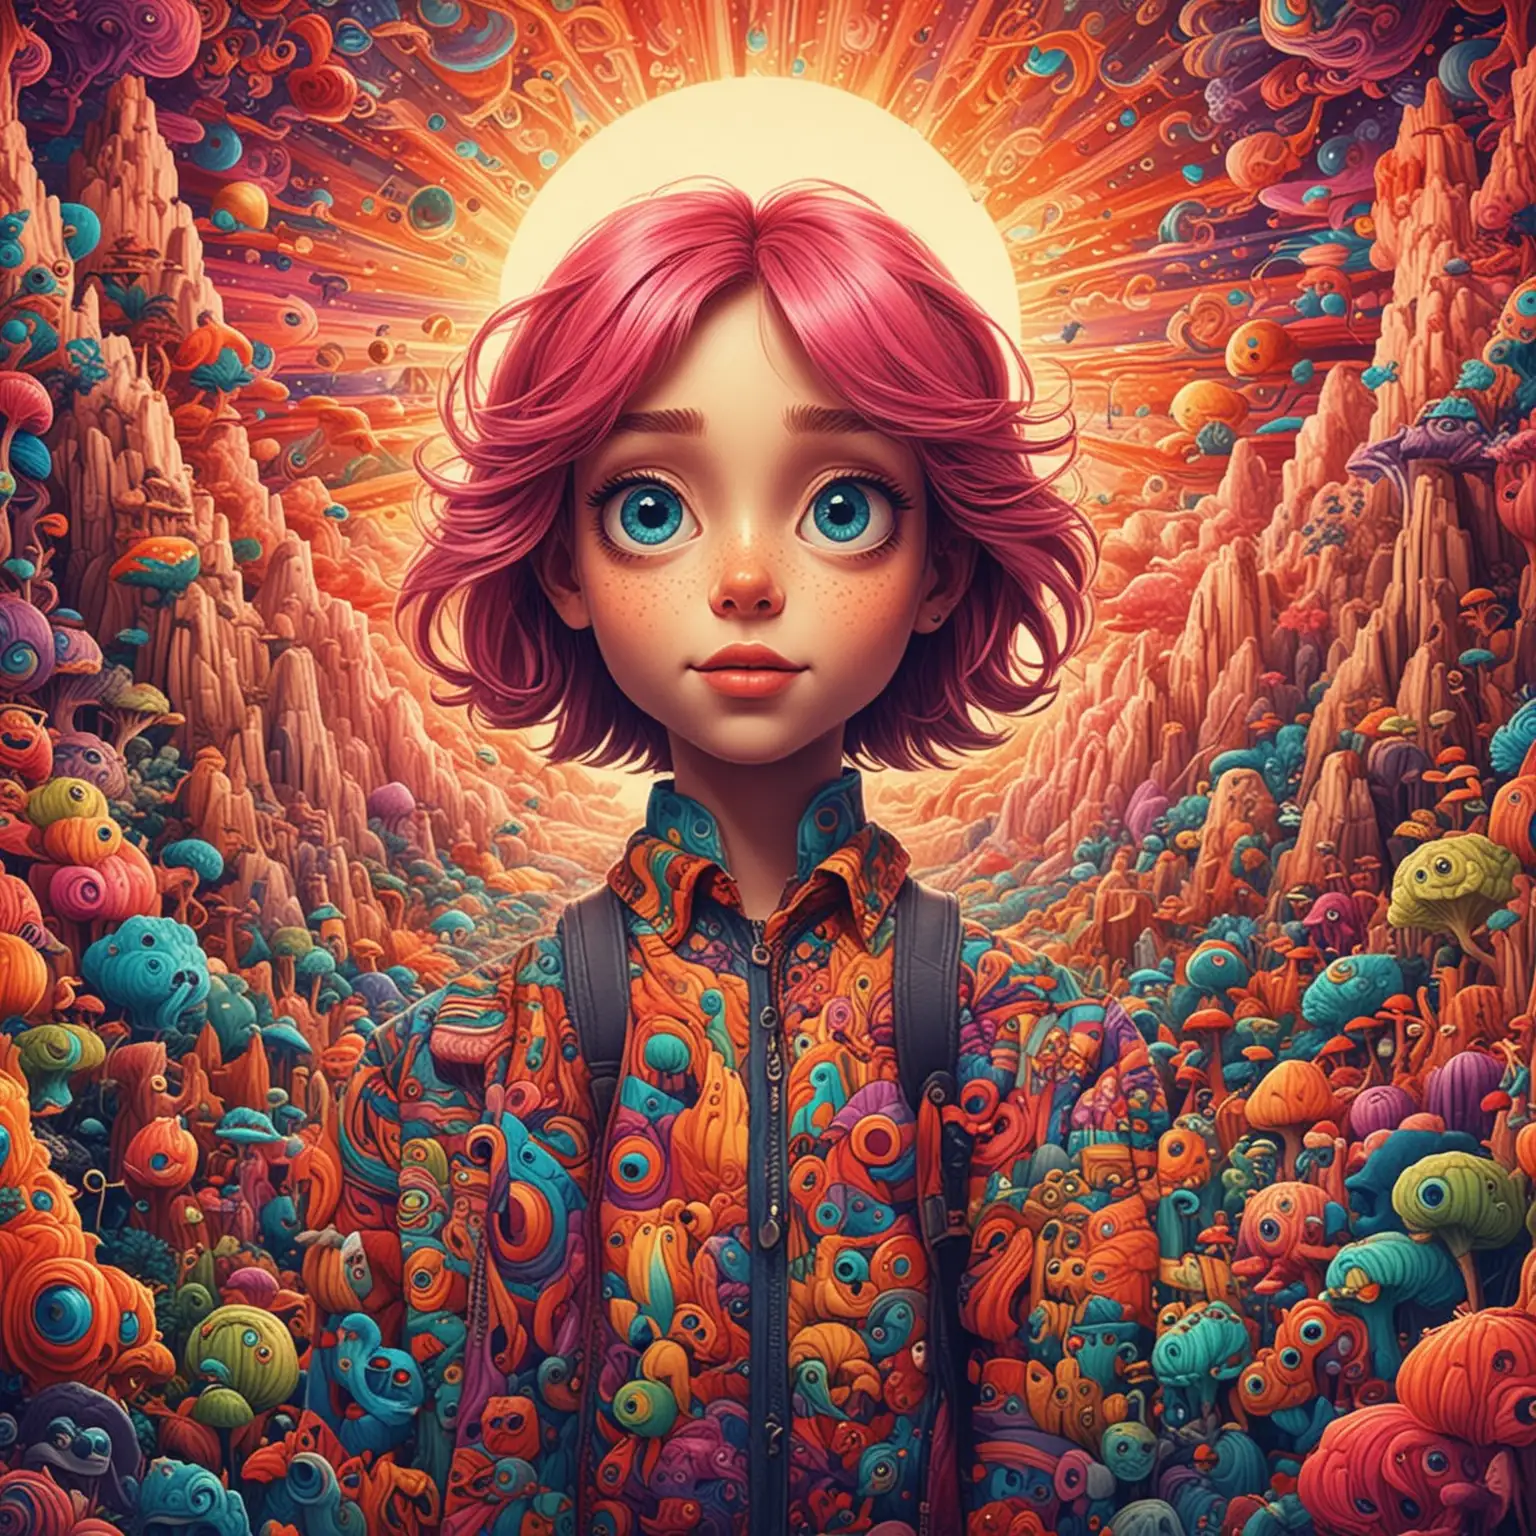 Psychedelic Cartoon Character in Diverse Environments